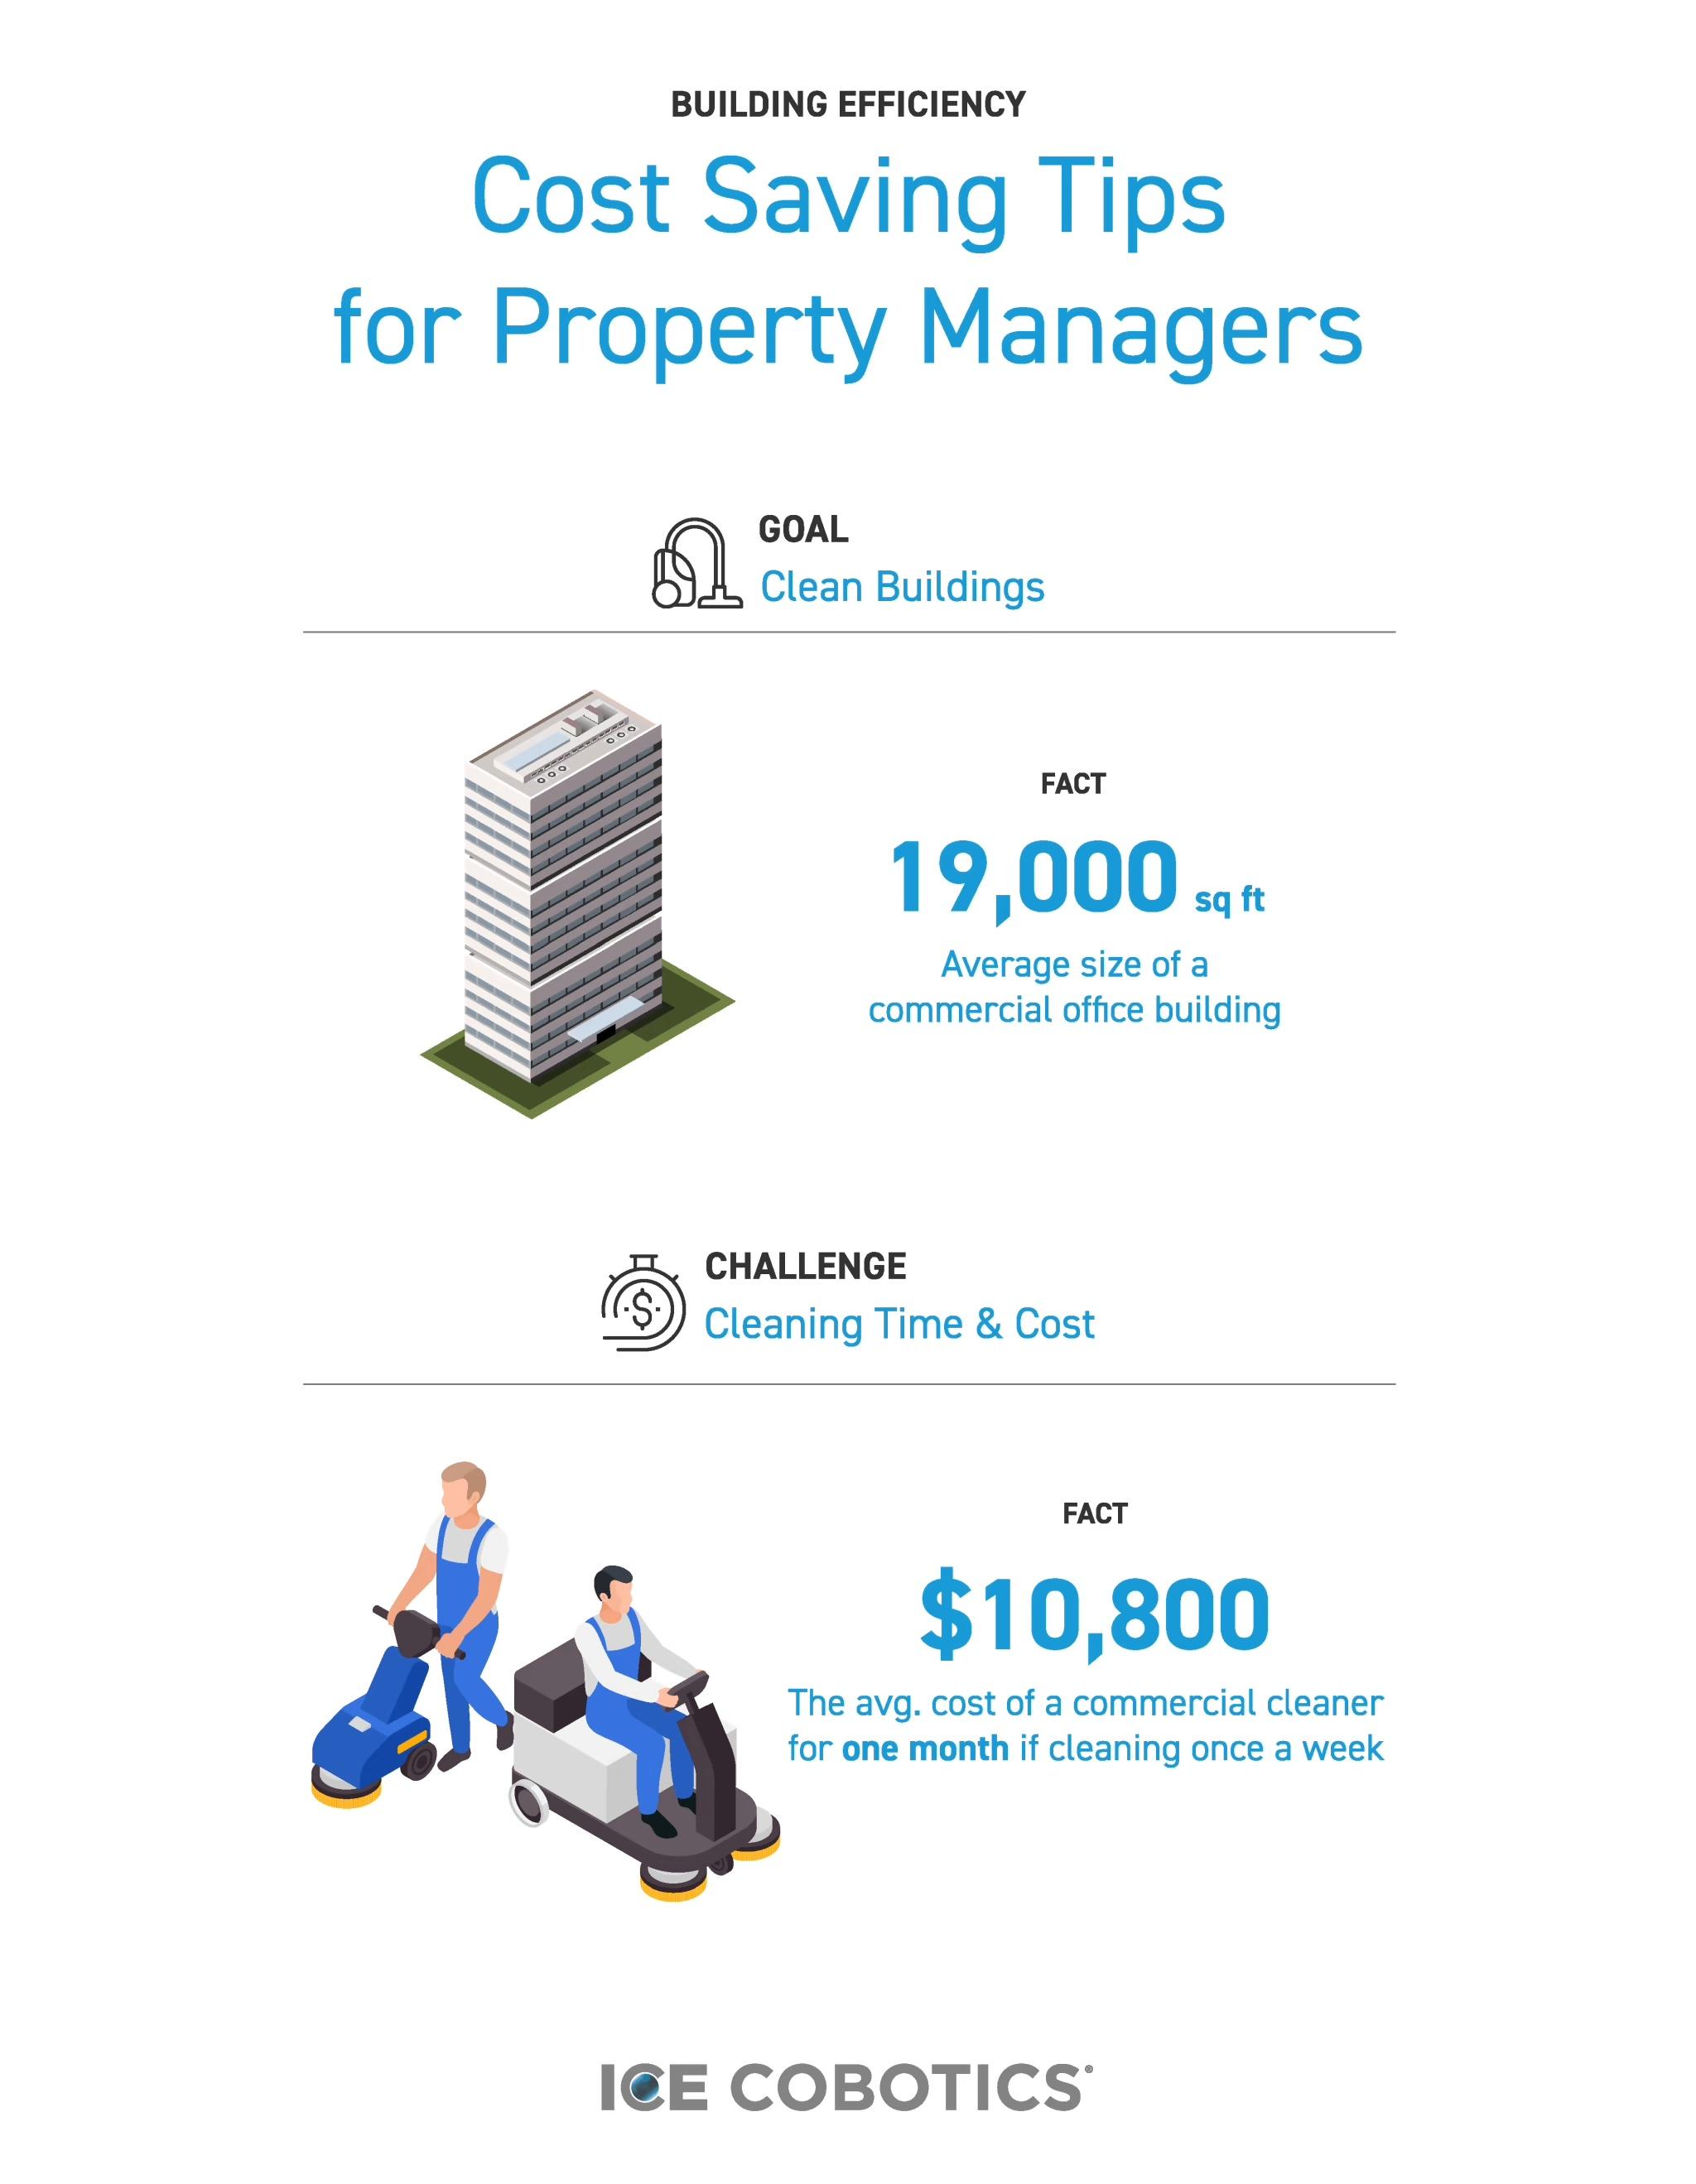 Cost Saving Tips for Property Mangers Infographic Guide